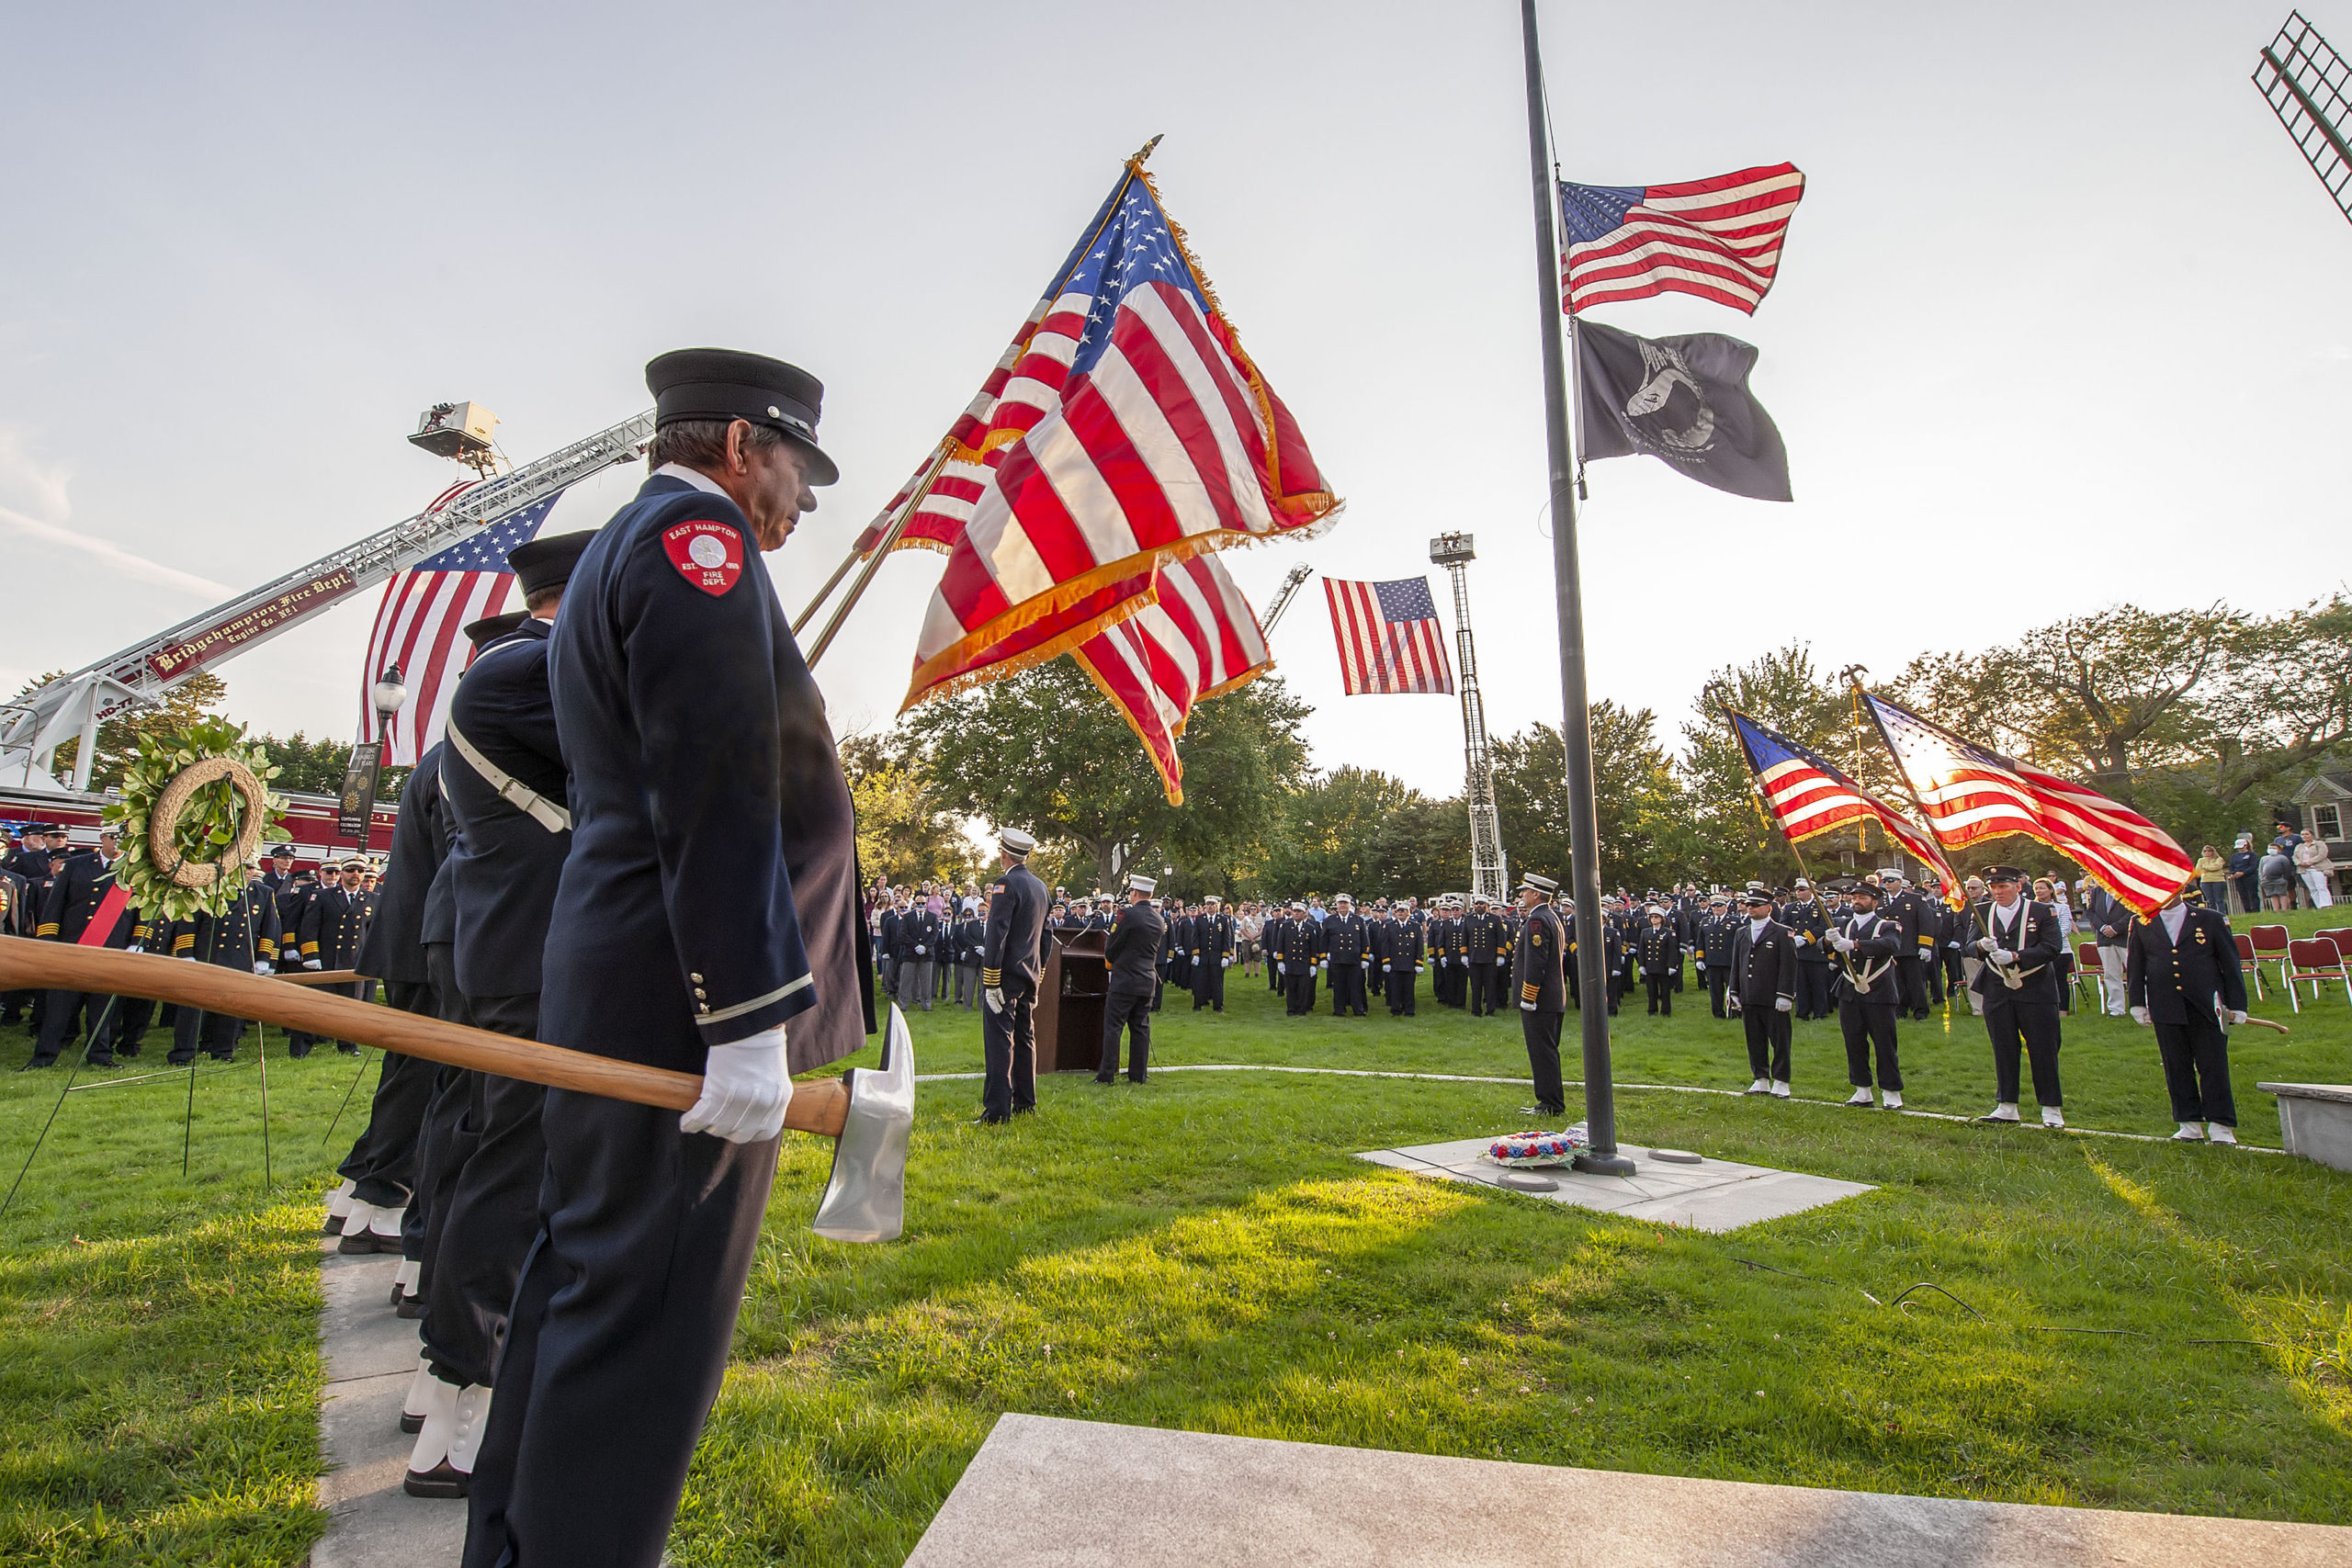 The ceremony commemorating the 20th anniversary of the attack on the World Trade Center, held on the Village Green in East Hampton and attended by 11 different East End fire, police and EMS agencies on Saturday afternoon.